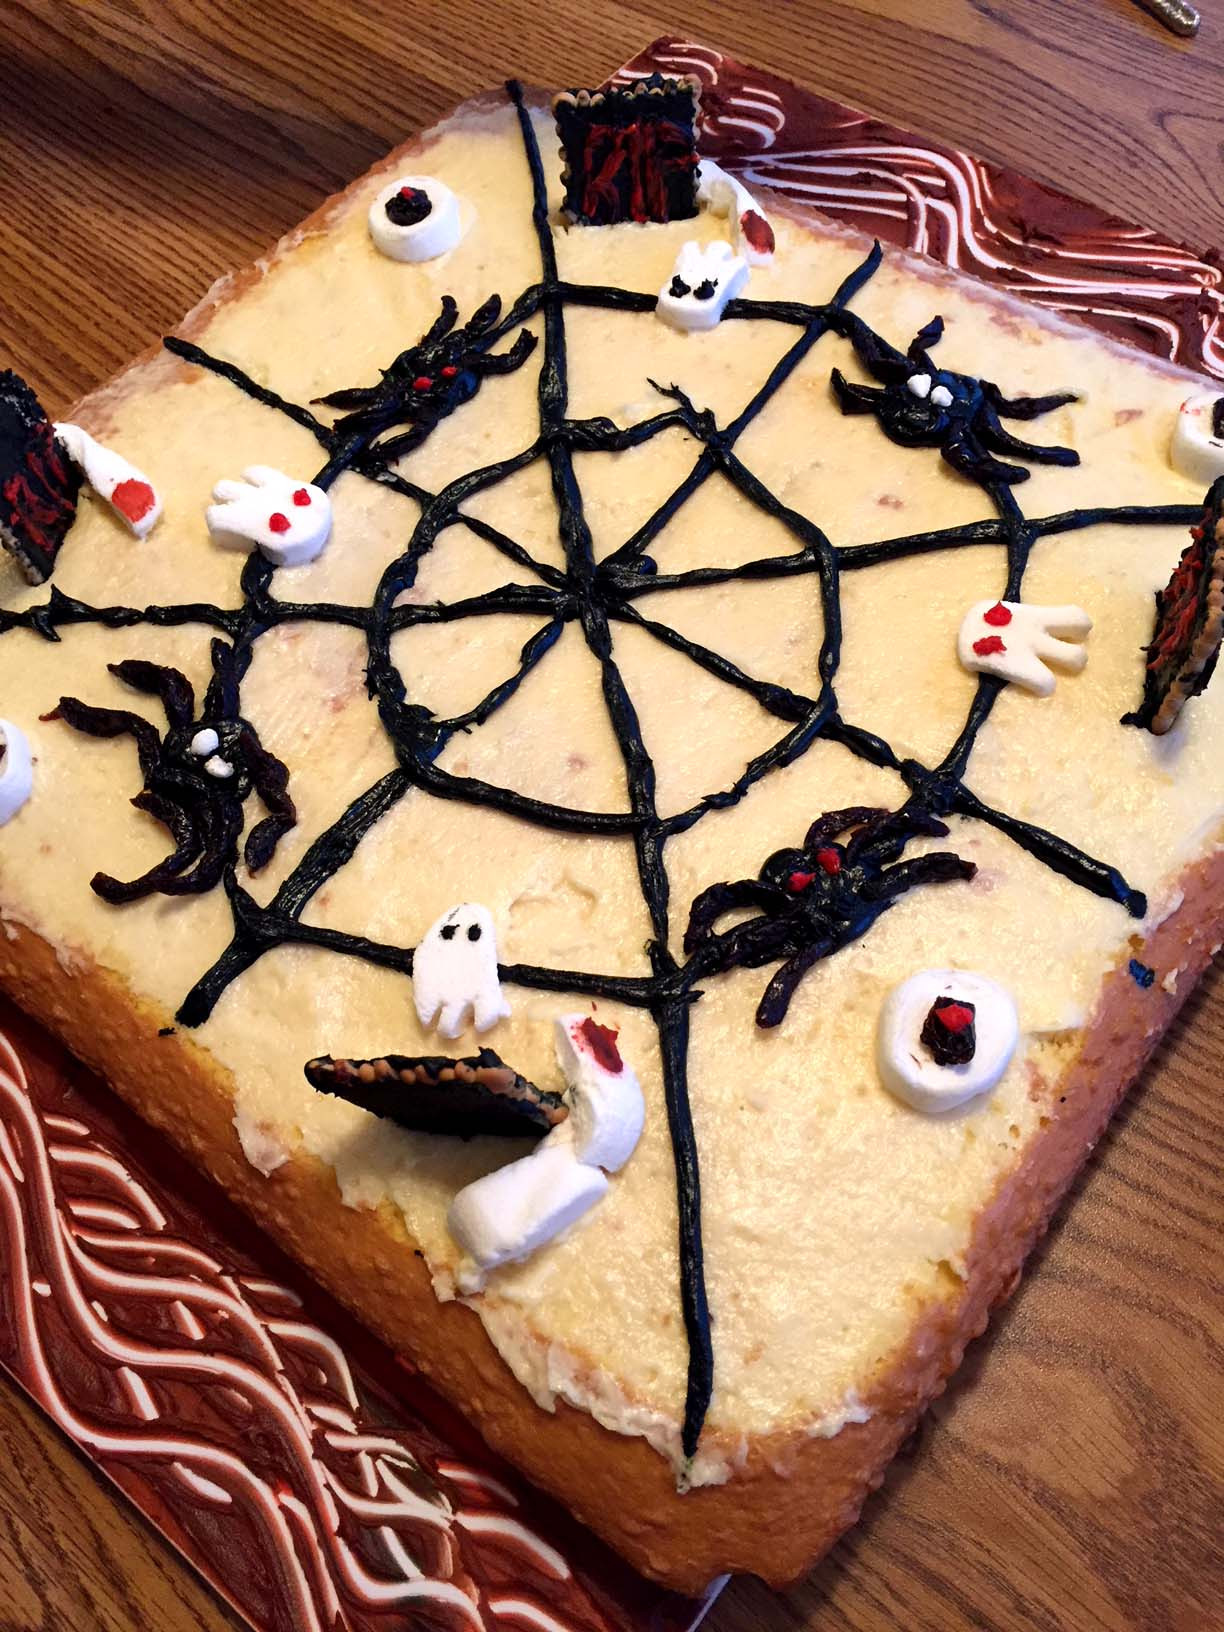 Simple Halloween Cakes
 Easy Halloween Cake Decorating Ideas For Spooky Cake